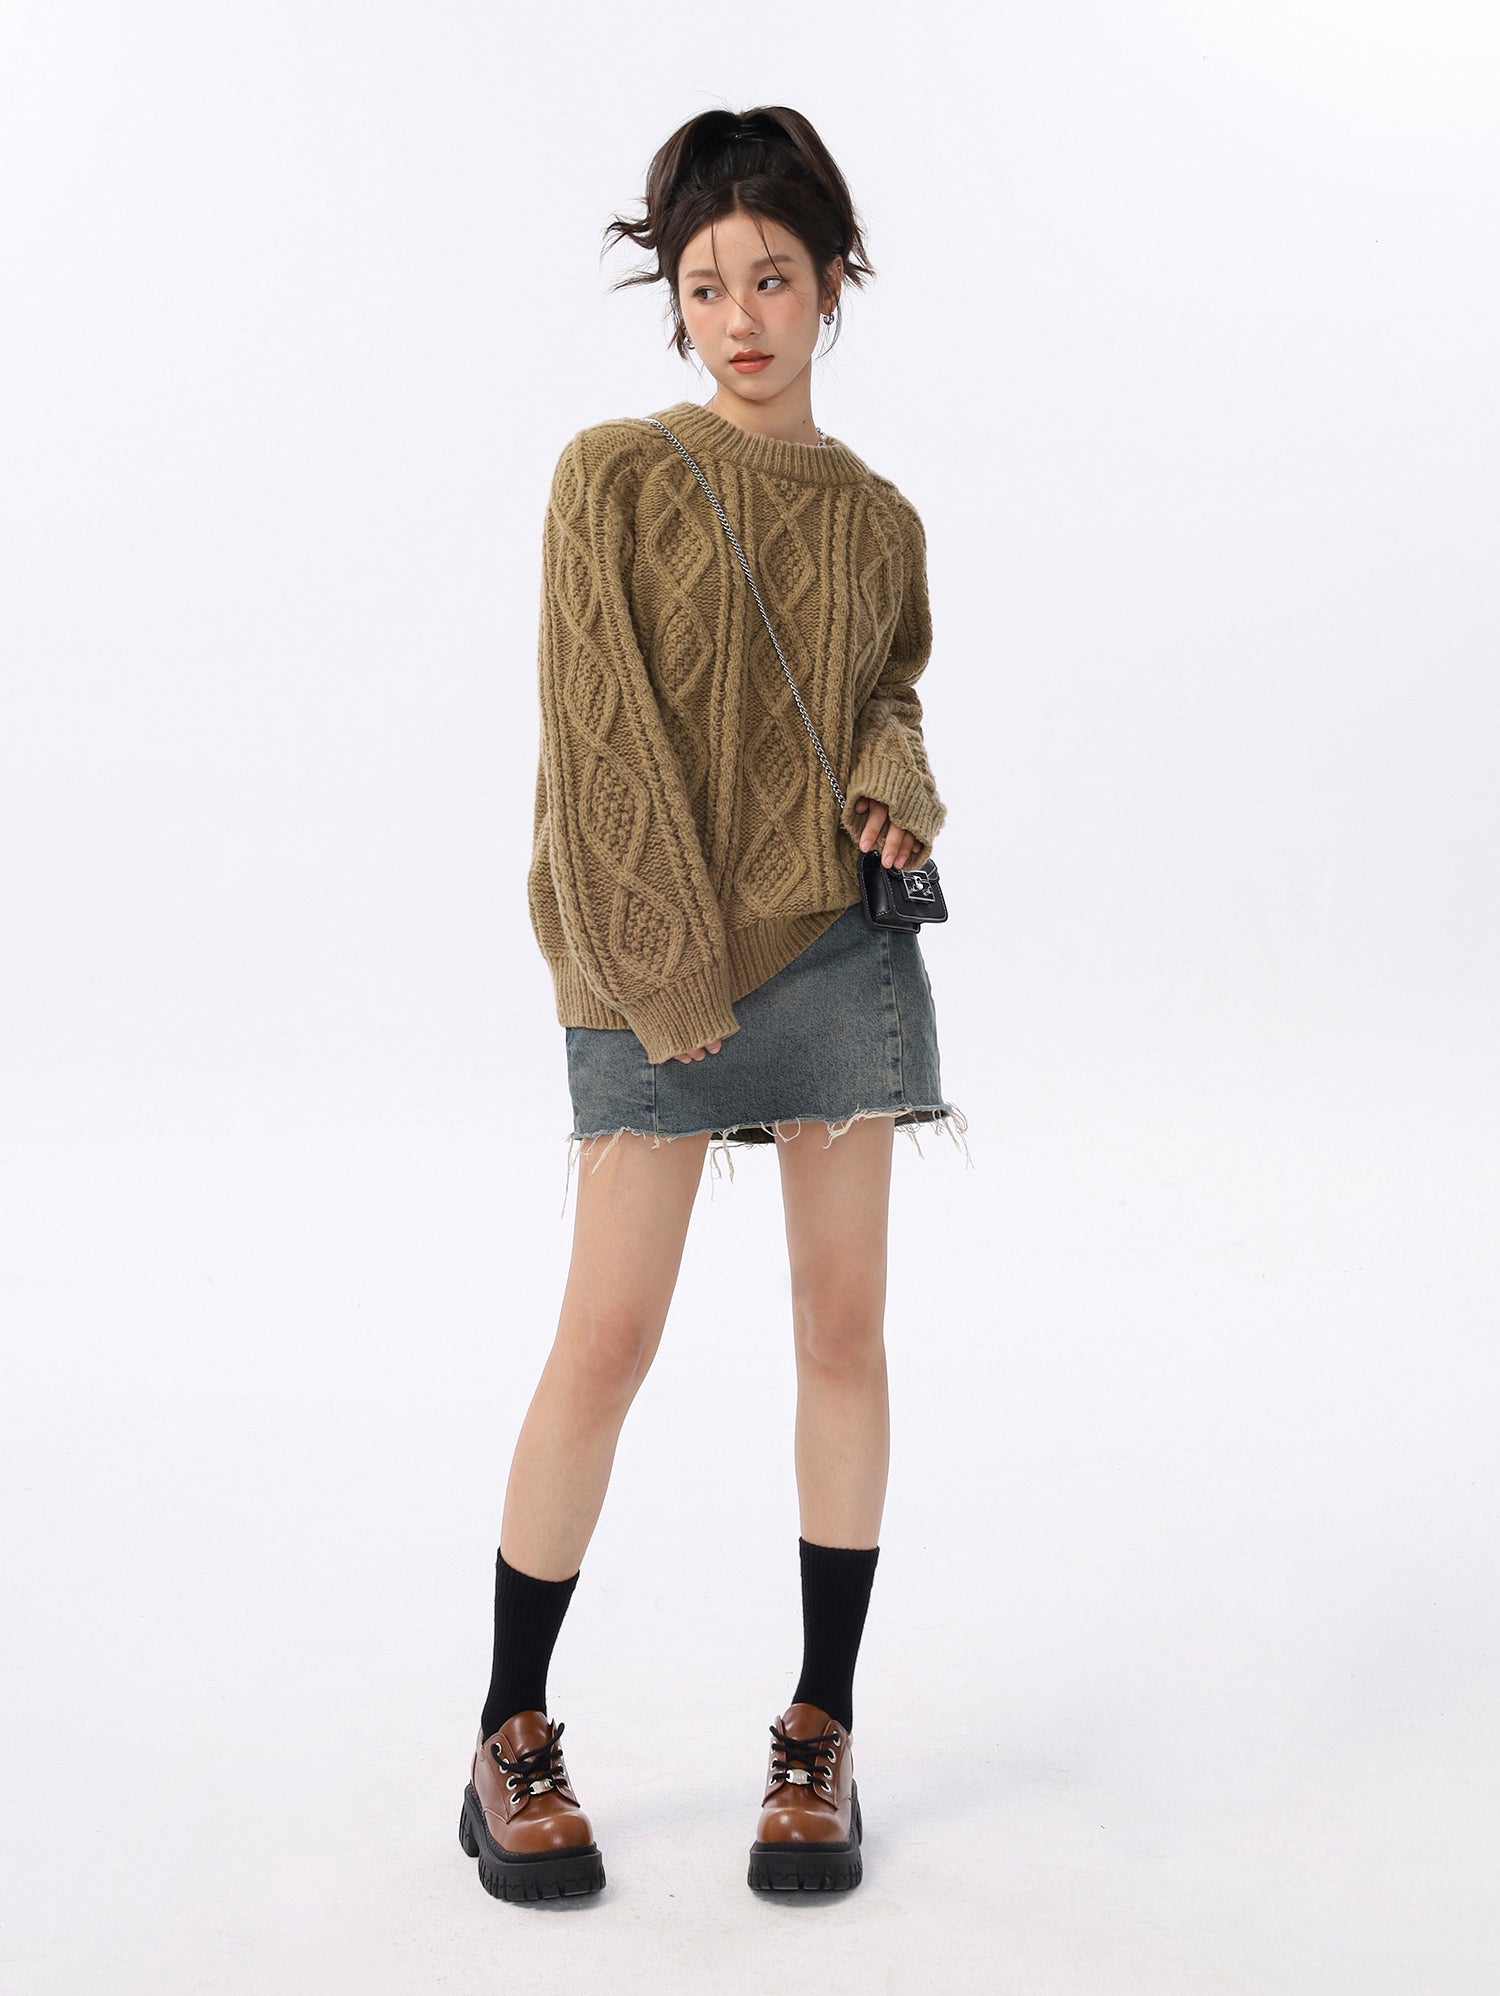 Ribbed Trim Textured Knit Pullover